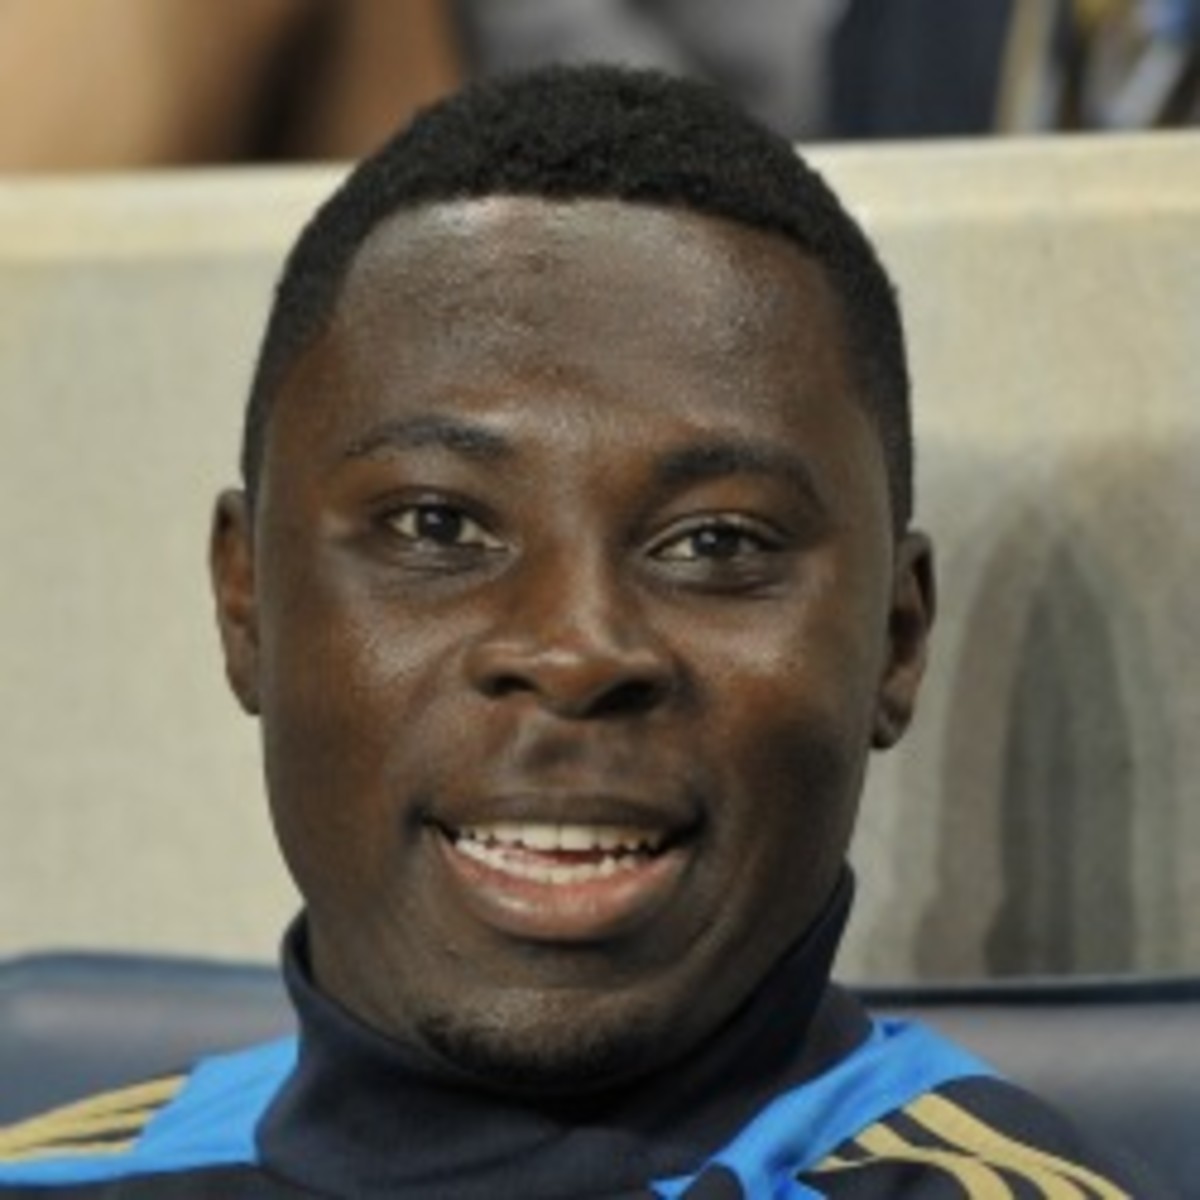 Freddy Adu #11 of the Philadelphia Union sits on the bench. (Photo by Drew Hallowell/Getty Images)